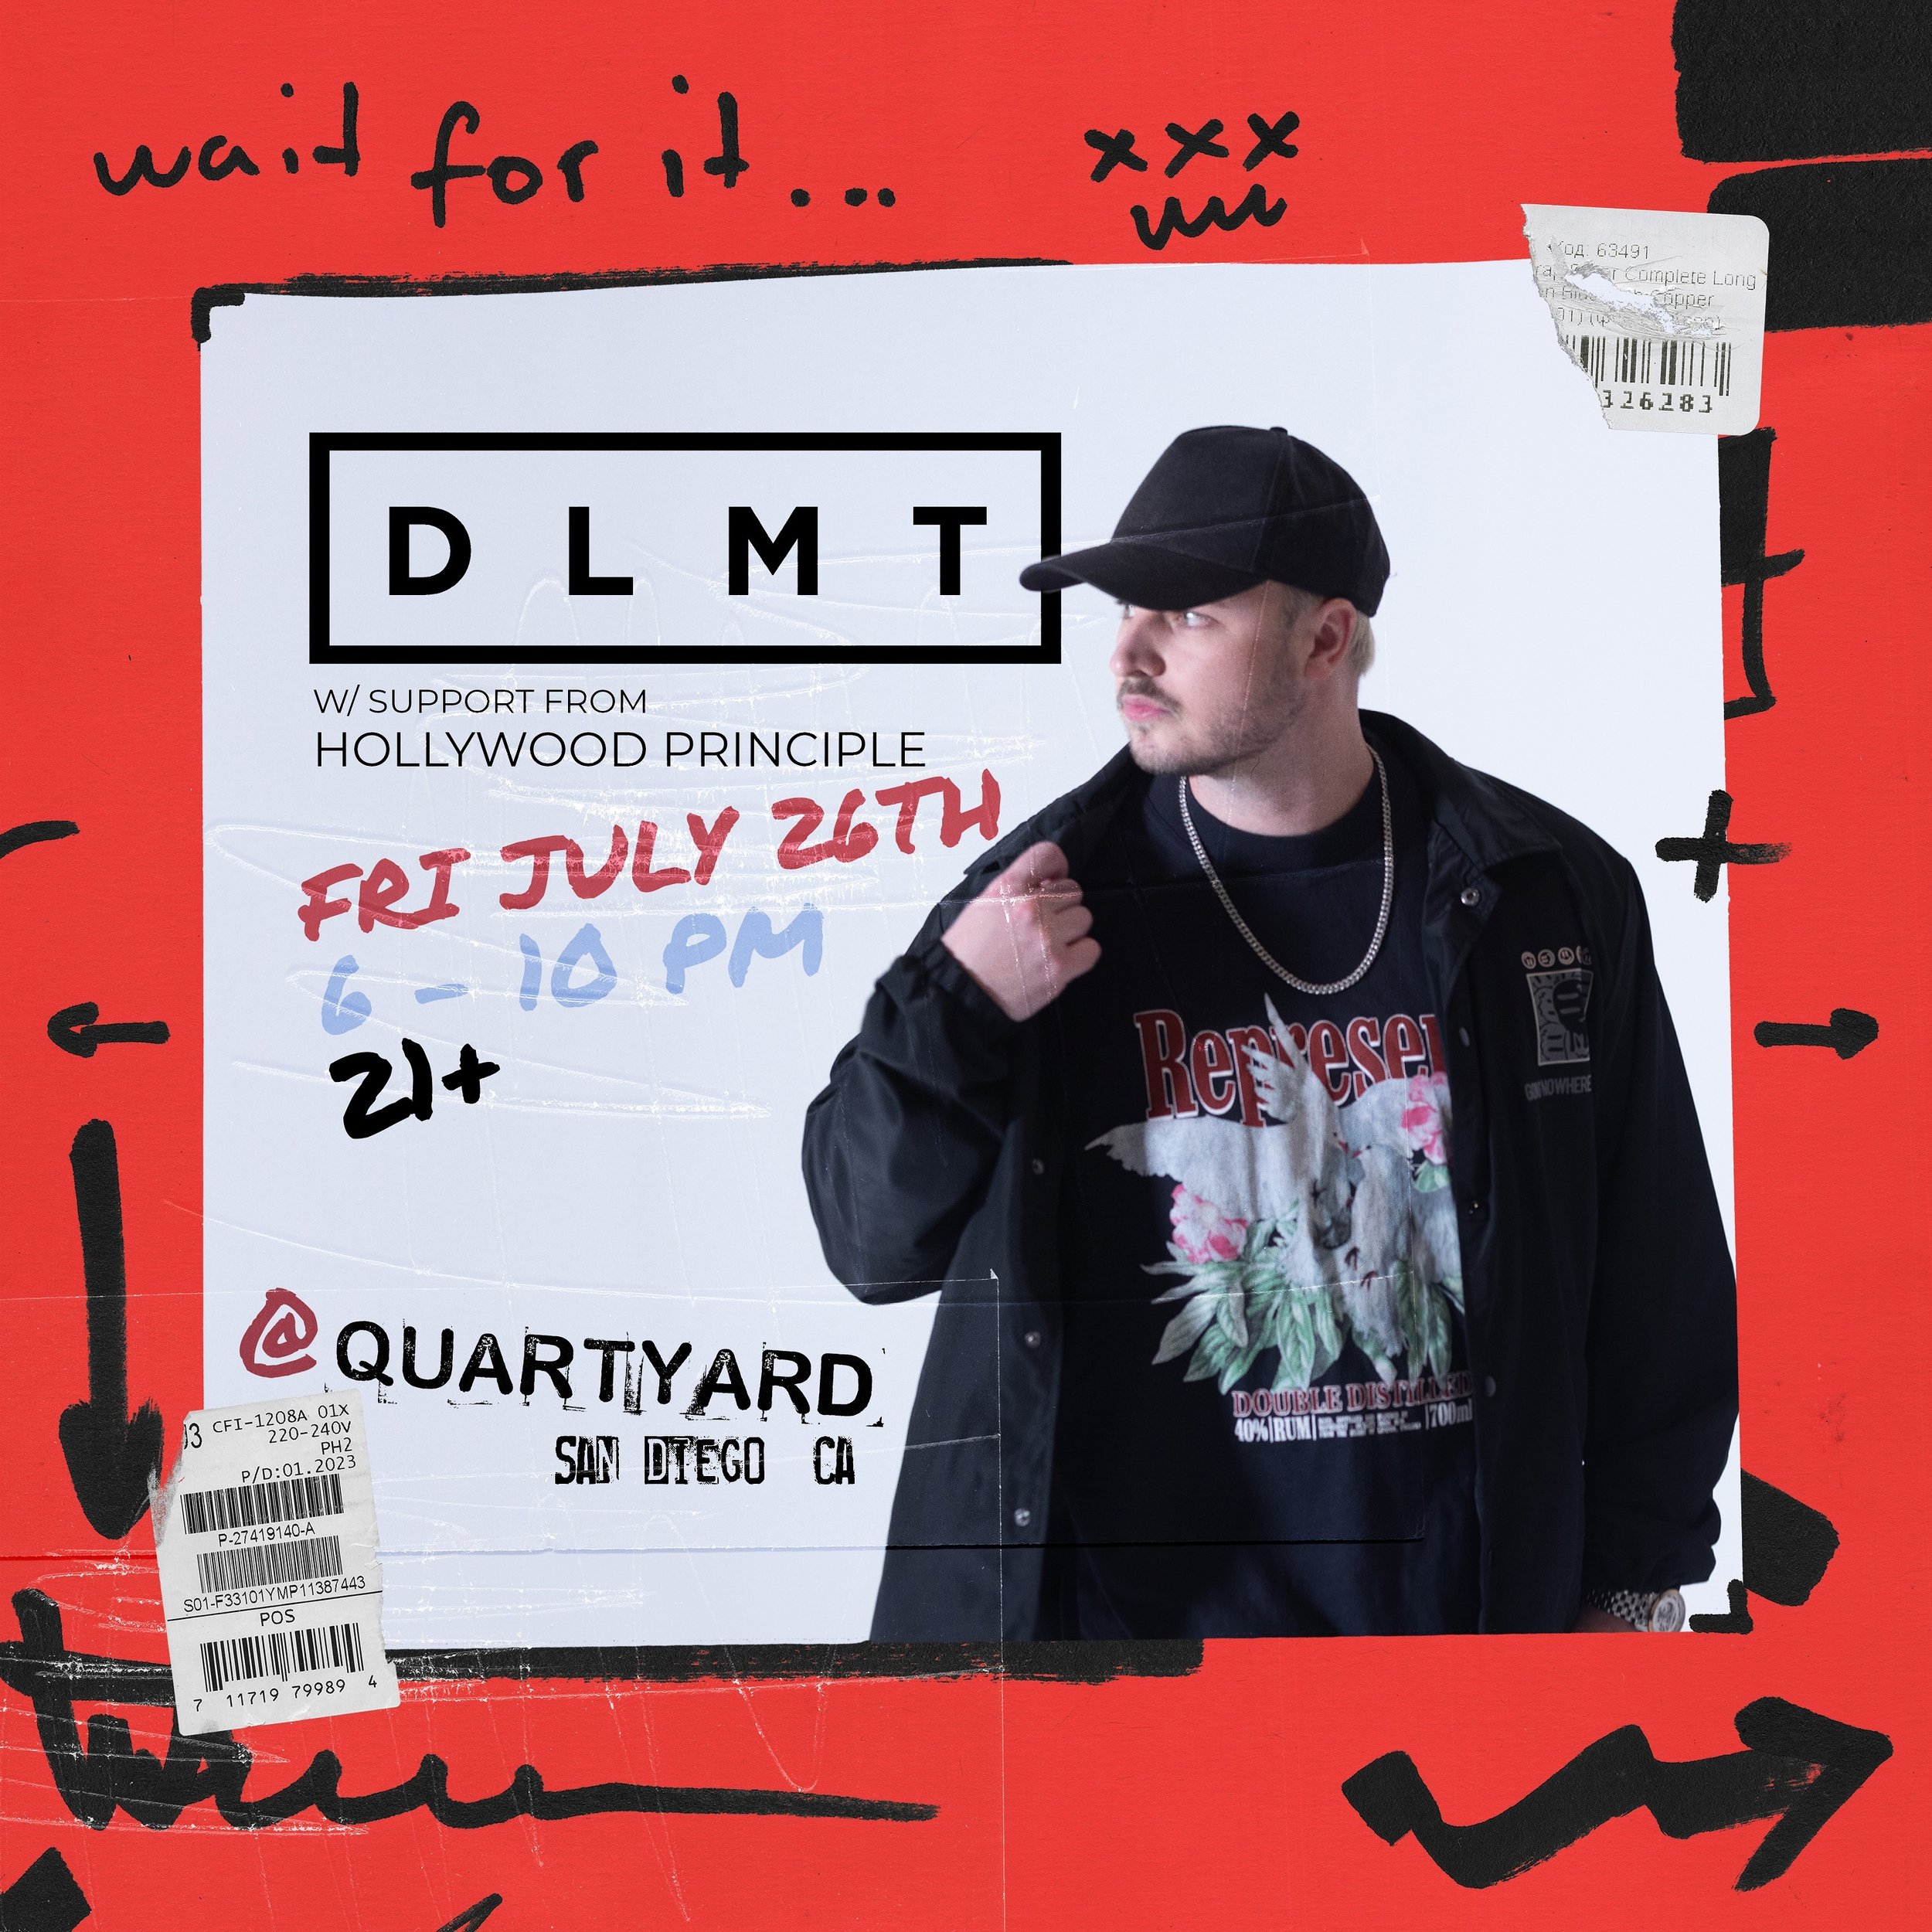 🚨New Show Incoming🚨 we are taking the stage as support to our wildly talented friend @dlmtmusic this July 27th @quartyardsd 

This is going to be a vibing night so comment 🫶 below to get sent the ticket link! 
.
.
.
#techhouse #newshowalert #sandi